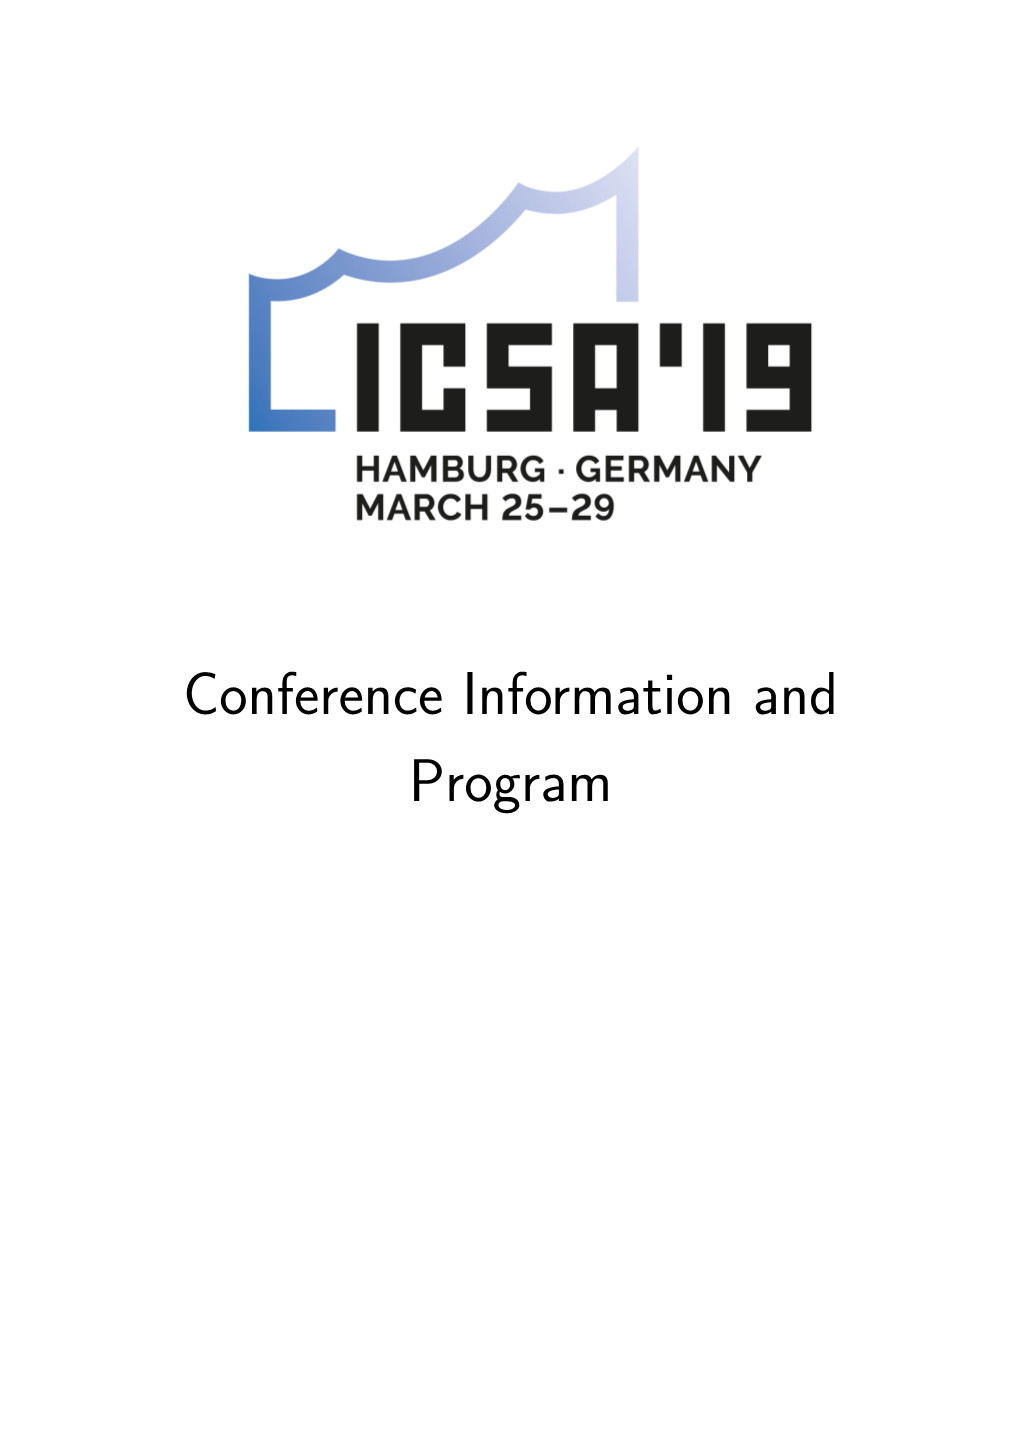 Conference Information and Program